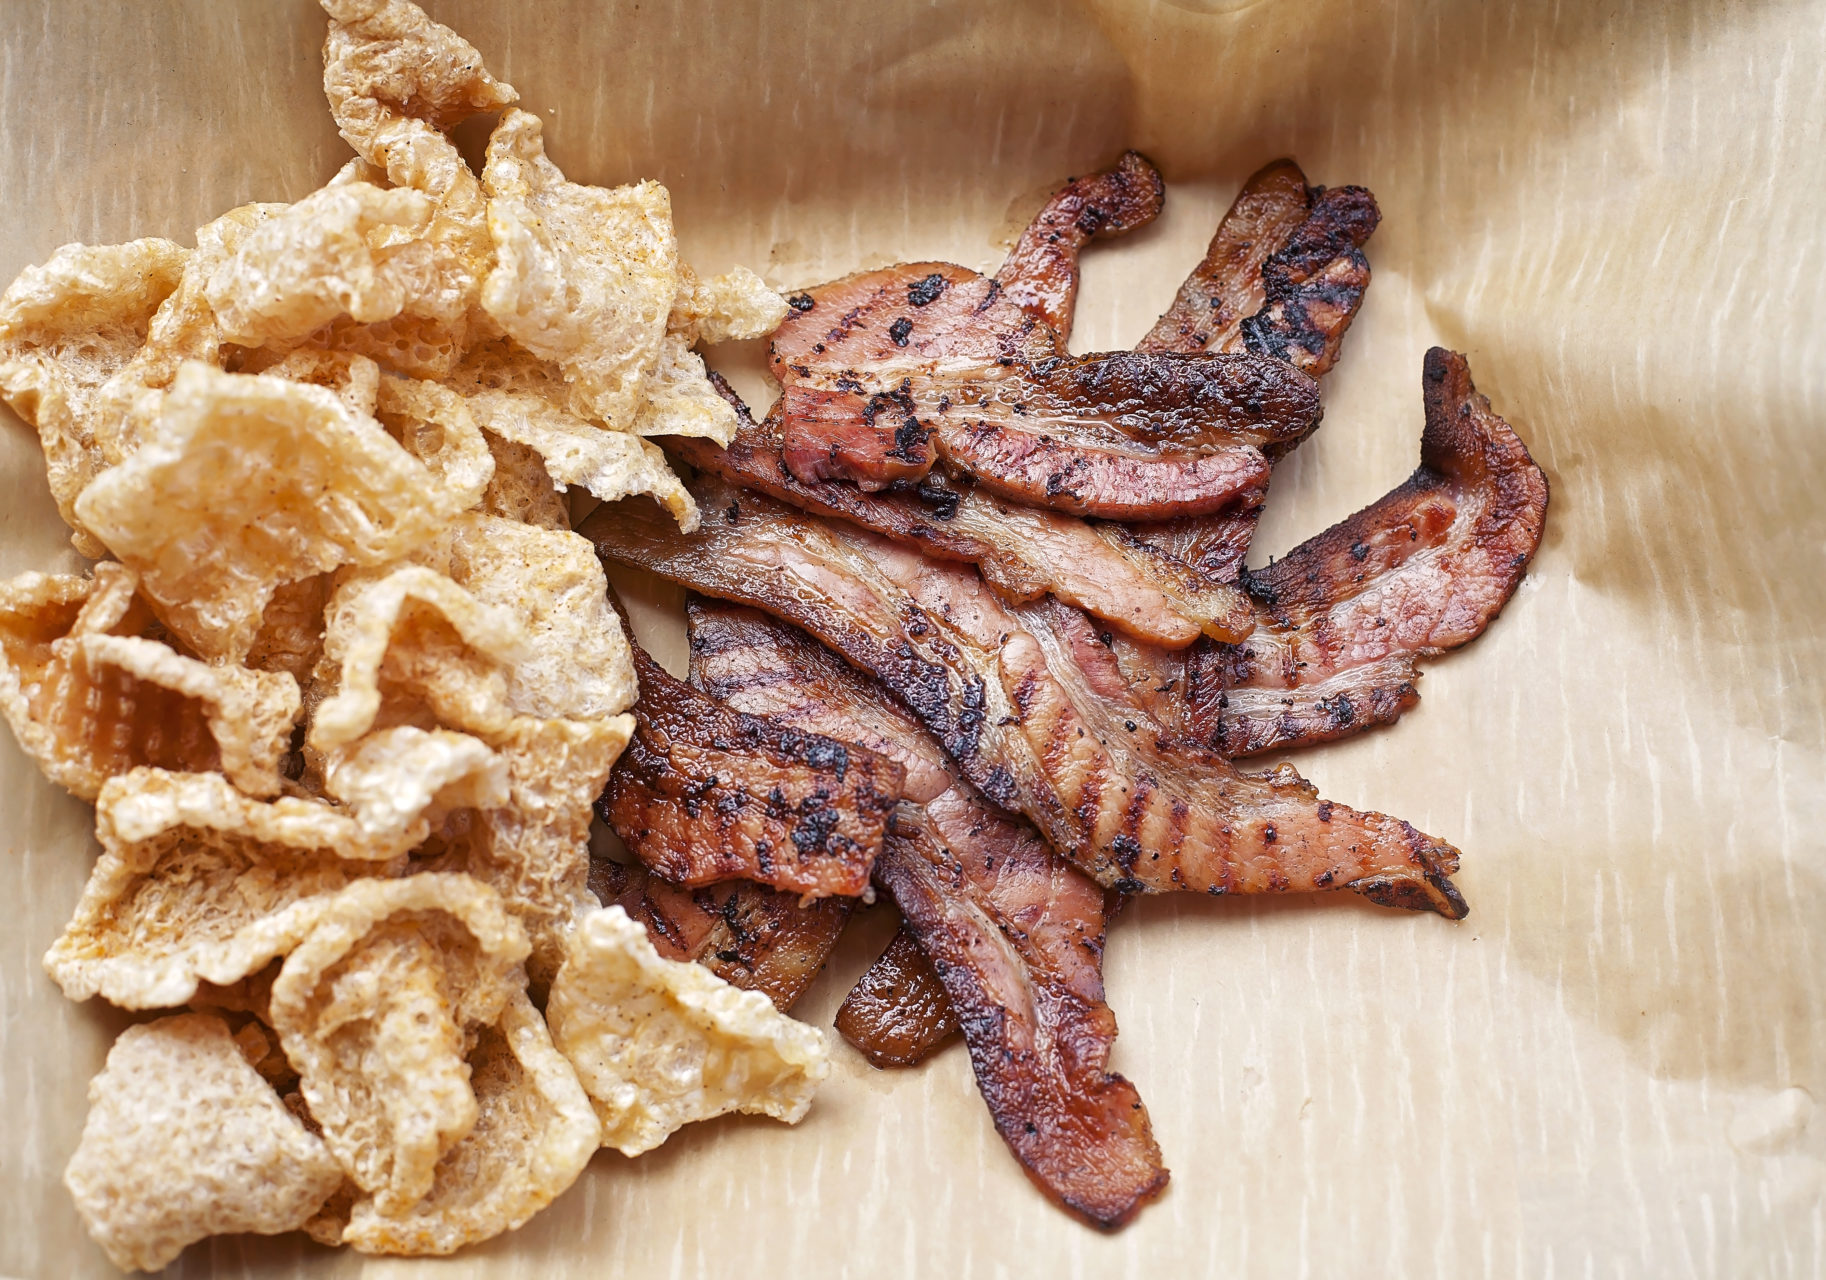 Bacon and pork rinds cured at The Shed BBQ & Blues Joint